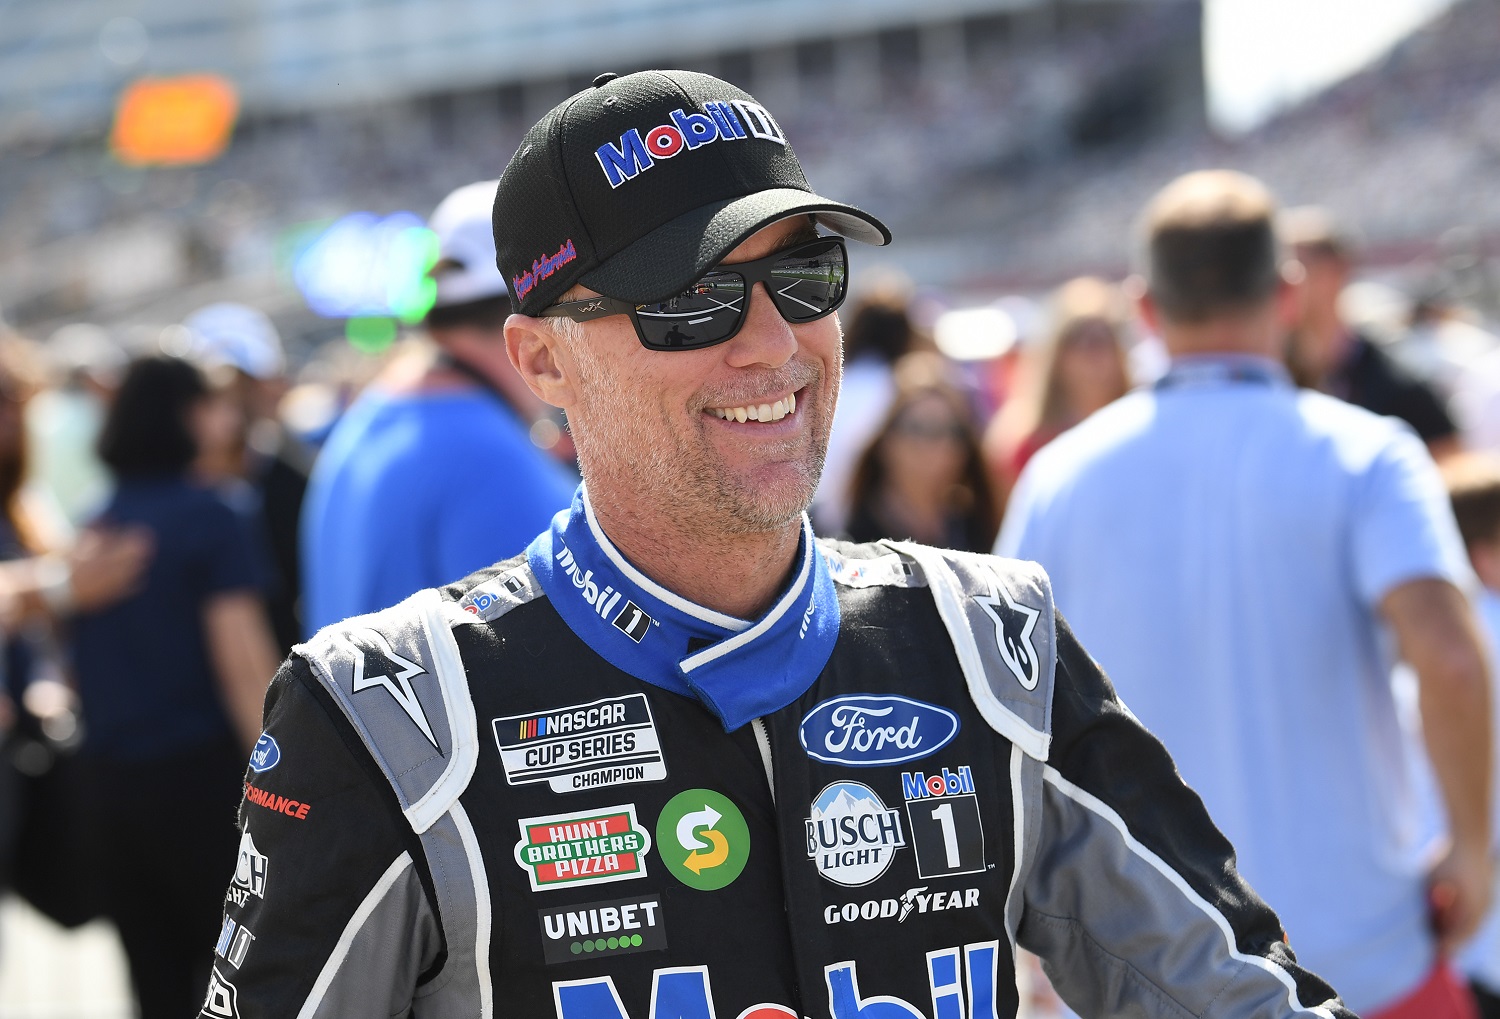 Kevin Harvick, driver of the No. 4 Ford, before the Bank of America Roval 400 NASCAR Cup Series playoff race on Oct, 10, 2021,at Charlotte Motor Speedway.